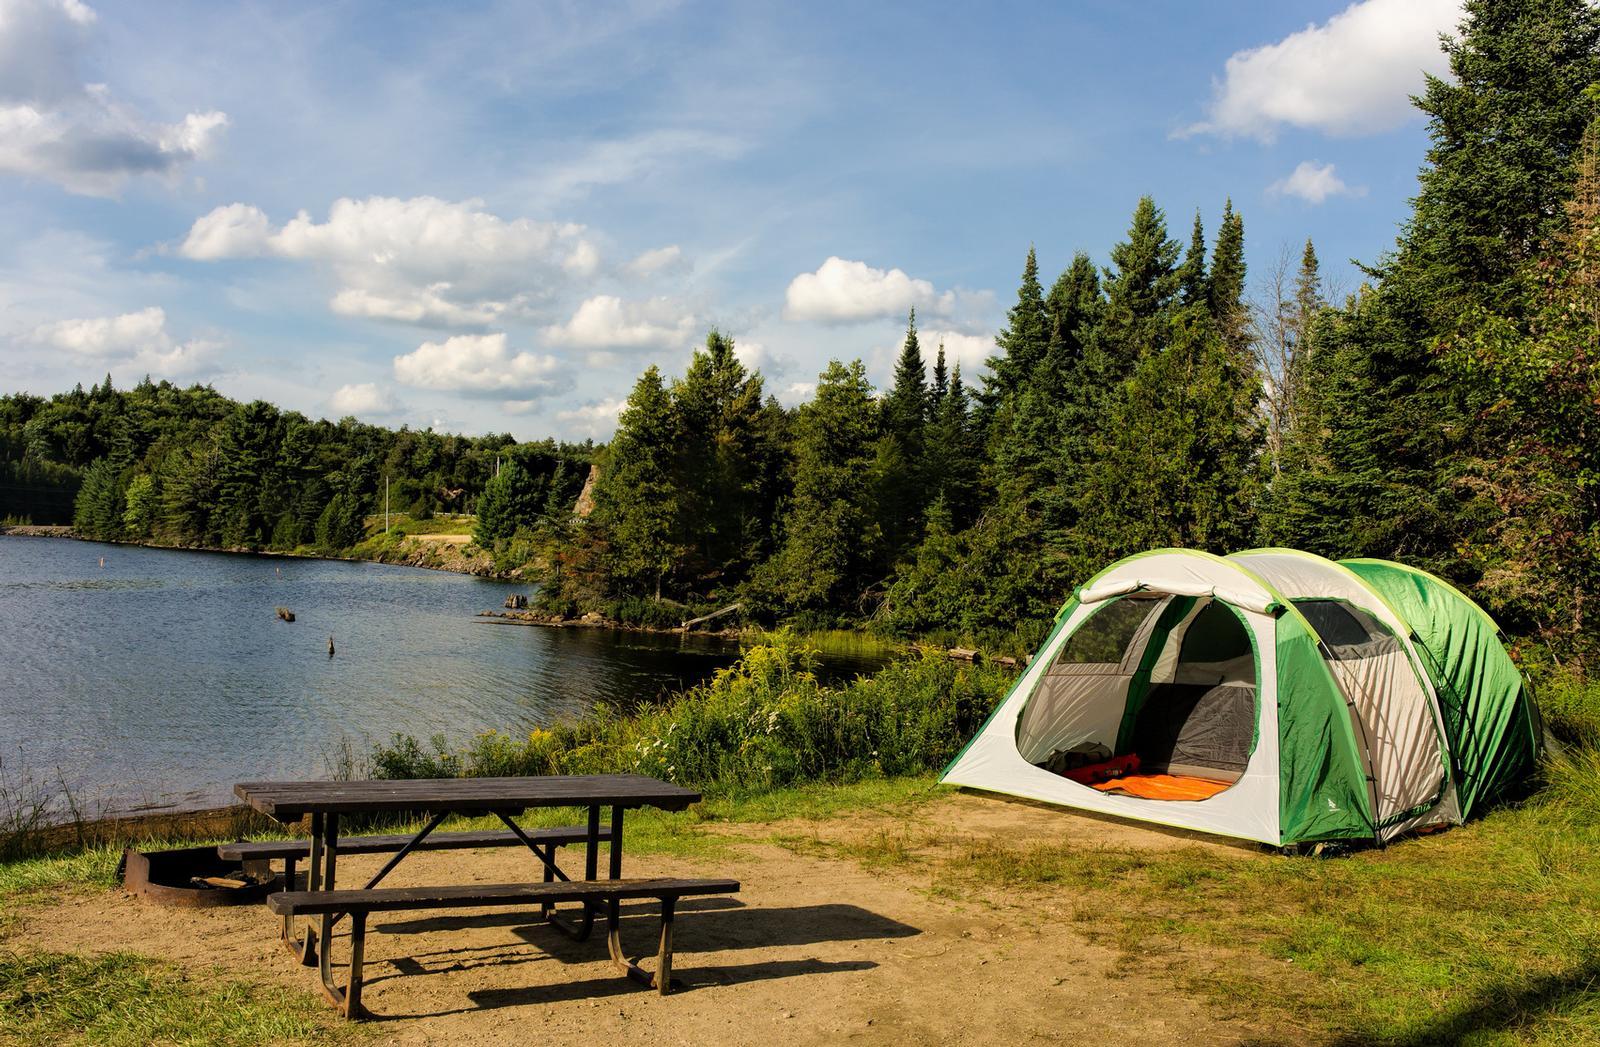 What You Need To Know To Make Your Camping out Trip Unique